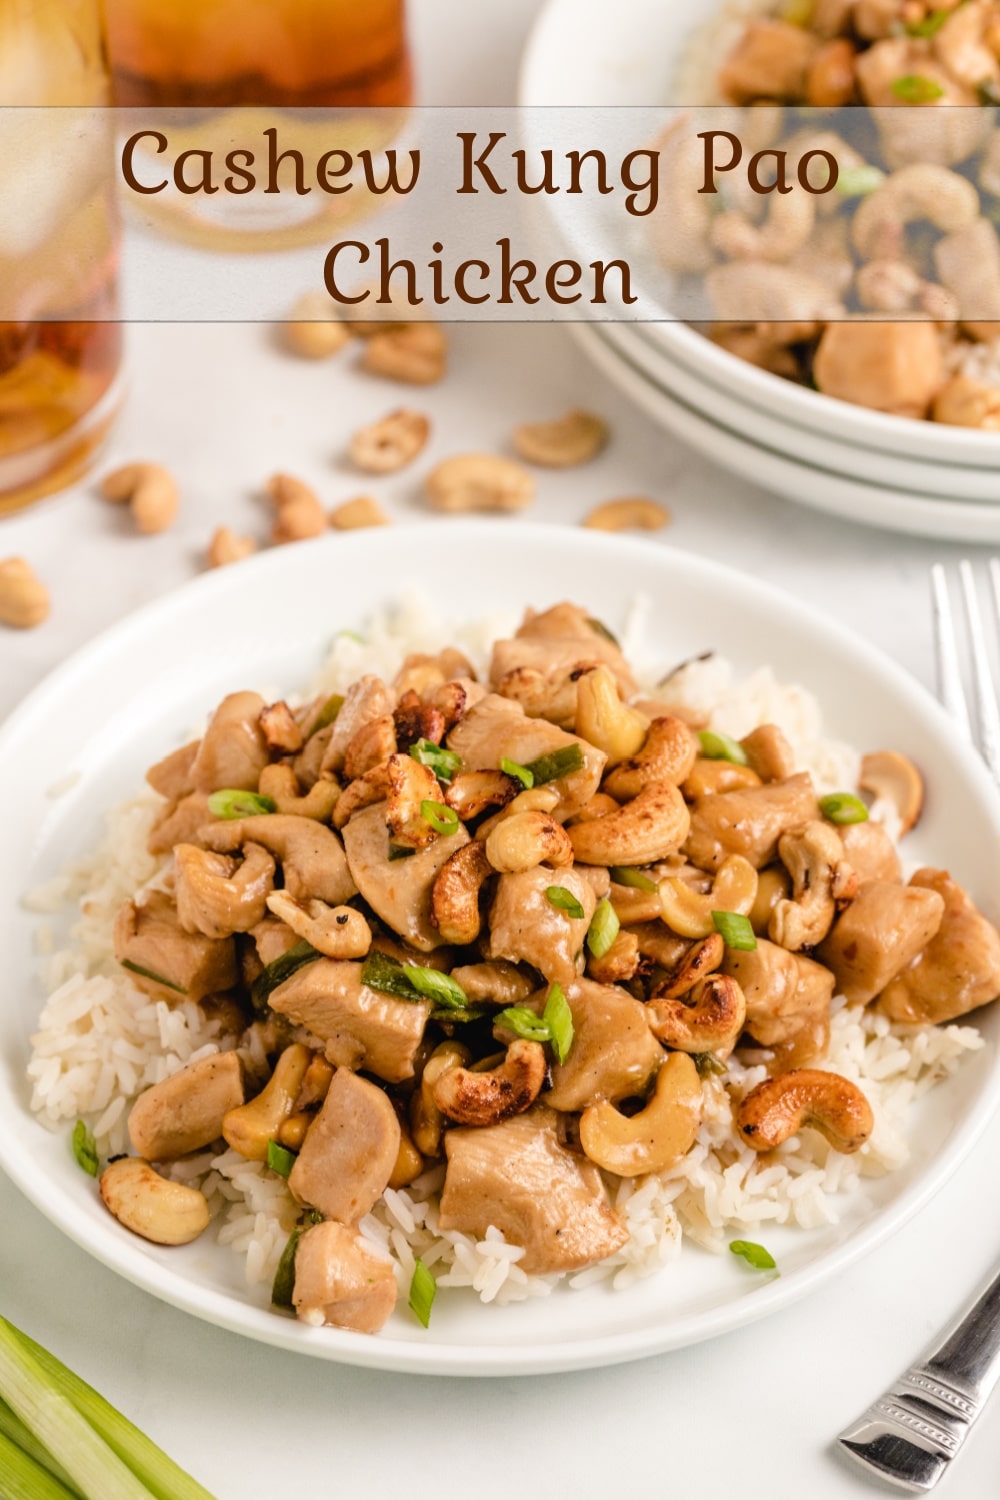 Spice up your weeknight dinner routine with this easy and flavorful cashew kung pao chicken recipe. With its satisfying combination of bold flavors and crunchy cashews, this dish is almost guaranteed to become a new family favorite. It is simple to make at home, so you can enjoy all the flavors of your favorite Chinese takeout without ever leaving the house. Try it tonight and experience the spicy, satisfying goodness for yourself. via @cmpollak1